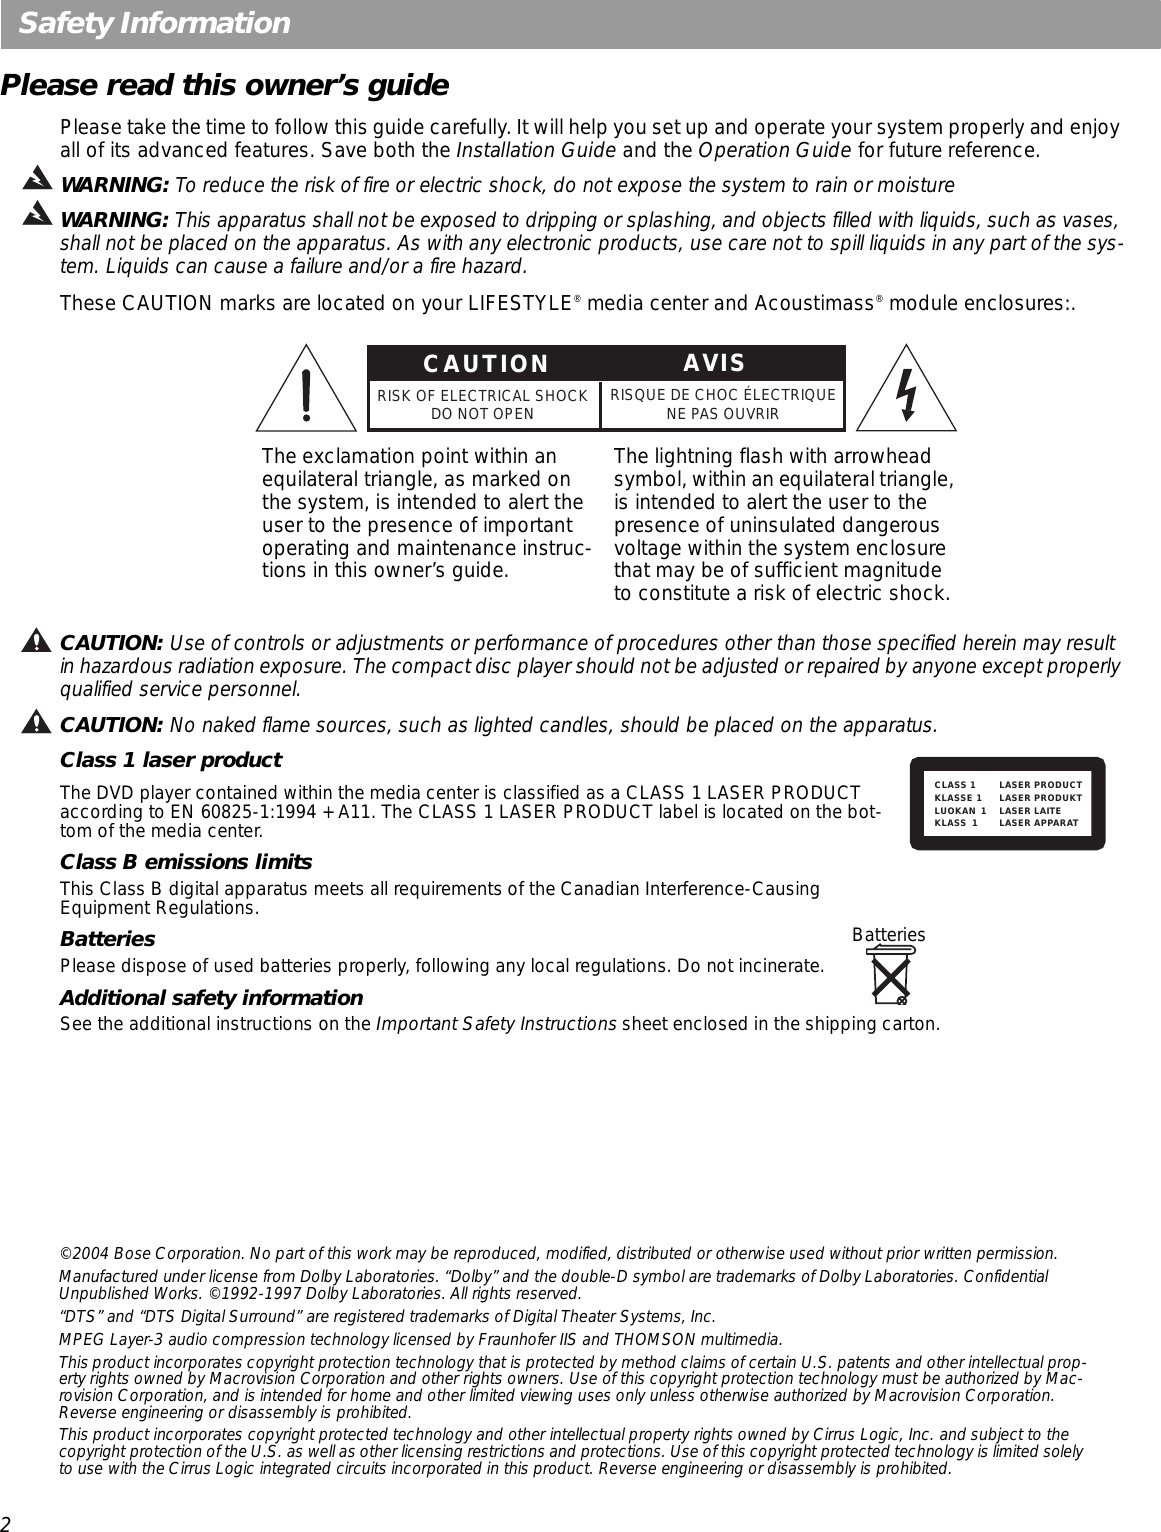 2Safety InformationPlease read this owner’s guidePlease take the time to follow this guide carefully. It will help you set up and operate your system properly and enjoy all of its advanced features. Save both the Installation Guide and the Operation Guide for future reference.WARNING: To reduce the risk of fire or electric shock, do not expose the system to rain or moistureWARNING: This apparatus shall not be exposed to dripping or splashing, and objects filled with liquids, such as vases, shall not be placed on the apparatus. As with any electronic products, use care not to spill liquids in any part of the sys-tem. Liquids can cause a failure and/or a fire hazard.These CAUTION marks are located on your LIFESTYLE® media center and Acoustimass® module enclosures:.CAUTION: Use of controls or adjustments or performance of procedures other than those specified herein may result in hazardous radiation exposure. The compact disc player should not be adjusted or repaired by anyone except properly qualified service personnel.CAUTION: No naked flame sources, such as lighted candles, should be placed on the apparatus.Class 1 laser productThe DVD player contained within the media center is classified as a CLASS 1 LASER PRODUCT according to EN 60825-1:1994 + A11. The CLASS 1 LASER PRODUCT label is located on the bot-tom of the media center.Class B emissions limitsThis Class B digital apparatus meets all requirements of the Canadian Interference-Causing Equipment Regulations.BatteriesPlease dispose of used batteries properly, following any local regulations. Do not incinerate.Additional safety informationSee the additional instructions on the Important Safety Instructions sheet enclosed in the shipping carton.The exclamation point within an equilateral triangle, as marked on the system, is intended to alert the user to the presence of important operating and maintenance instruc-tions in this owner’s guide.The lightning flash with arrowhead symbol, within an equilateral triangle, is intended to alert the user to the presence of uninsulated dangerous voltage within the system enclosure that may be of sufficient magnitude to constitute a risk of electric shock.CAUTIONRISK OF ELECTRICAL SHOCKDO NOT OPEN RISQUE DE CHOC ÉLECTRIQUENE PAS OUVRIRAVISCLASS 1 LASER PRODUCTKLASSE 1 LASER PRODUKTLUOKAN 1 LASER LAITEKLASS 1 LASER APPARATBatteries©2004 Bose Corporation. No part of this work may be reproduced, modified, distributed or otherwise used without prior written permission.Manufactured under license from Dolby Laboratories. “Dolby” and the double-D symbol are trademarks of Dolby Laboratories. Confidential Unpublished Works. ©1992-1997 Dolby Laboratories. All rights reserved.“DTS” and “DTS Digital Surround” are registered trademarks of Digital Theater Systems, Inc.MPEG Layer-3 audio compression technology licensed by Fraunhofer IIS and THOMSON multimedia.This product incorporates copyright protection technology that is protected by method claims of certain U.S. patents and other intellectual prop-erty rights owned by Macrovision Corporation and other rights owners. Use of this copyright protection technology must be authorized by Mac-rovision Corporation, and is intended for home and other limited viewing uses only unless otherwise authorized by Macrovision Corporation. Reverse engineering or disassembly is prohibited.This product incorporates copyright protected technology and other intellectual property rights owned by Cirrus Logic, Inc. and subject to the copyright protection of the U.S. as well as other licensing restrictions and protections. Use of this copyright protected technology is limited solely to use with the Cirrus Logic integrated circuits incorporated in this product. Reverse engineering or disassembly is prohibited.